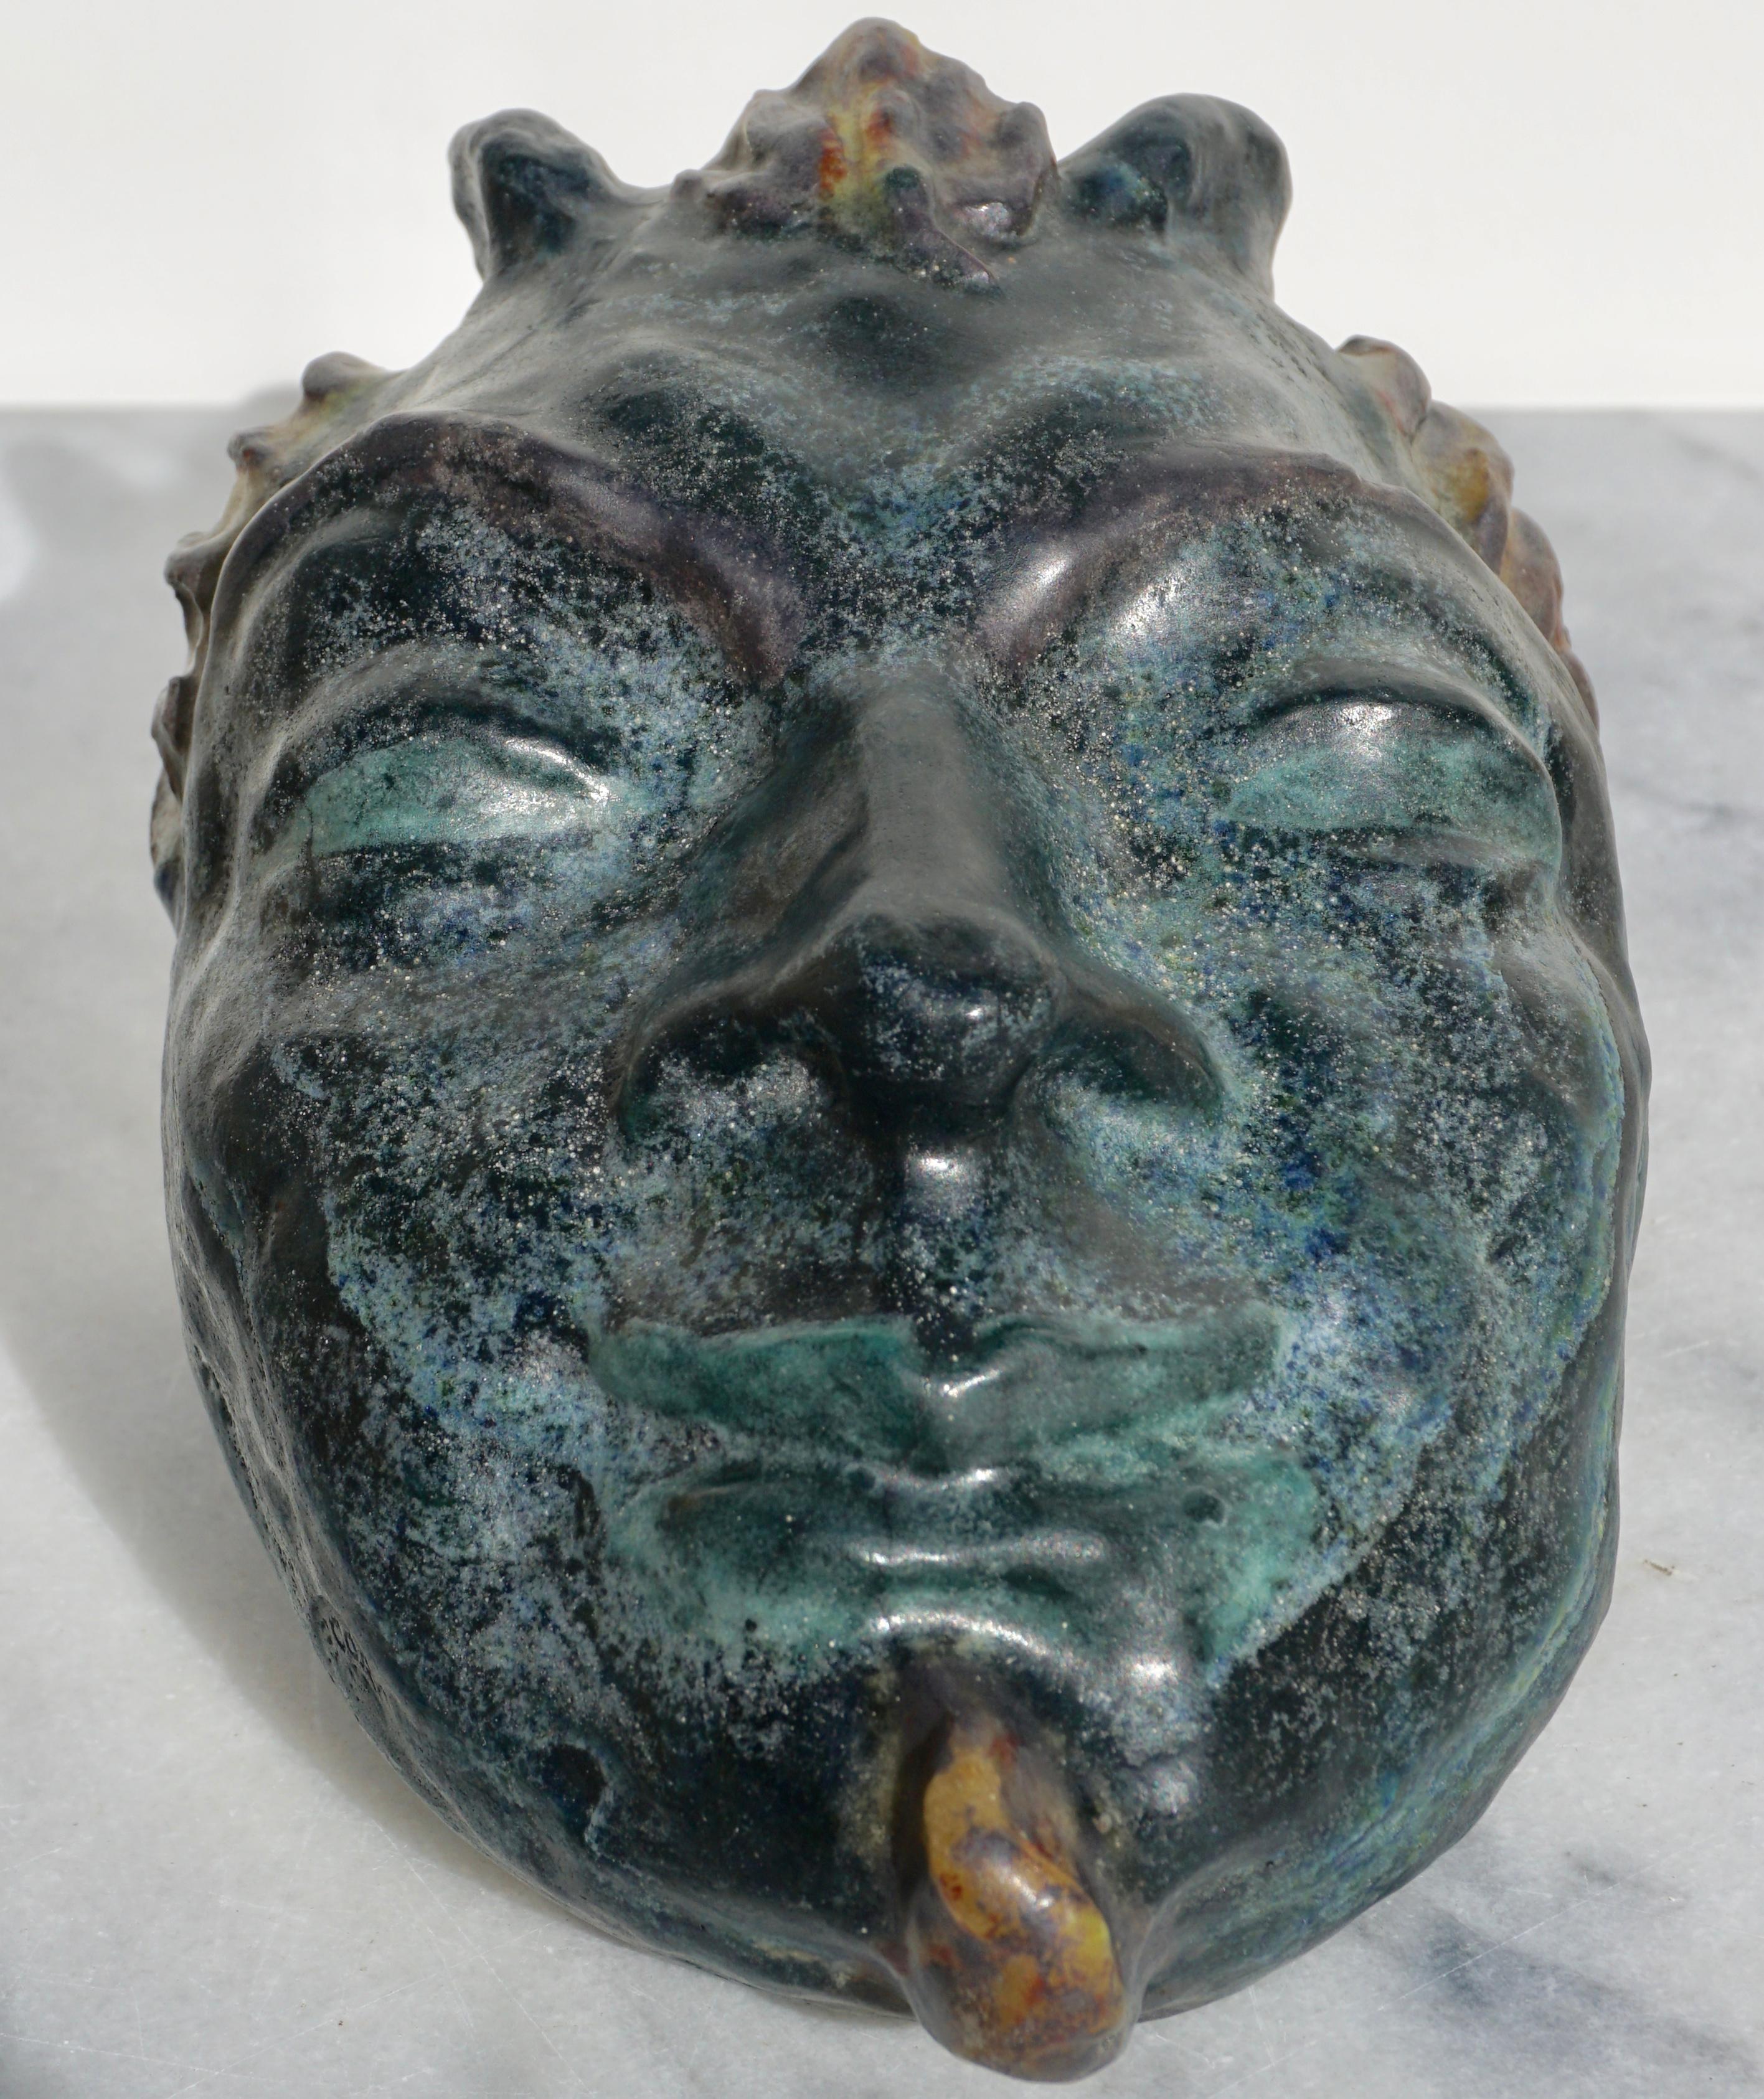 A rare and large pate de verre molded sculpture of the mythological God Pan. Very thick and heavy; this glass piece is primarily bluish green with yellow, reds and orange. The likeness is uncanny with perfectly modeled facial features and traces of